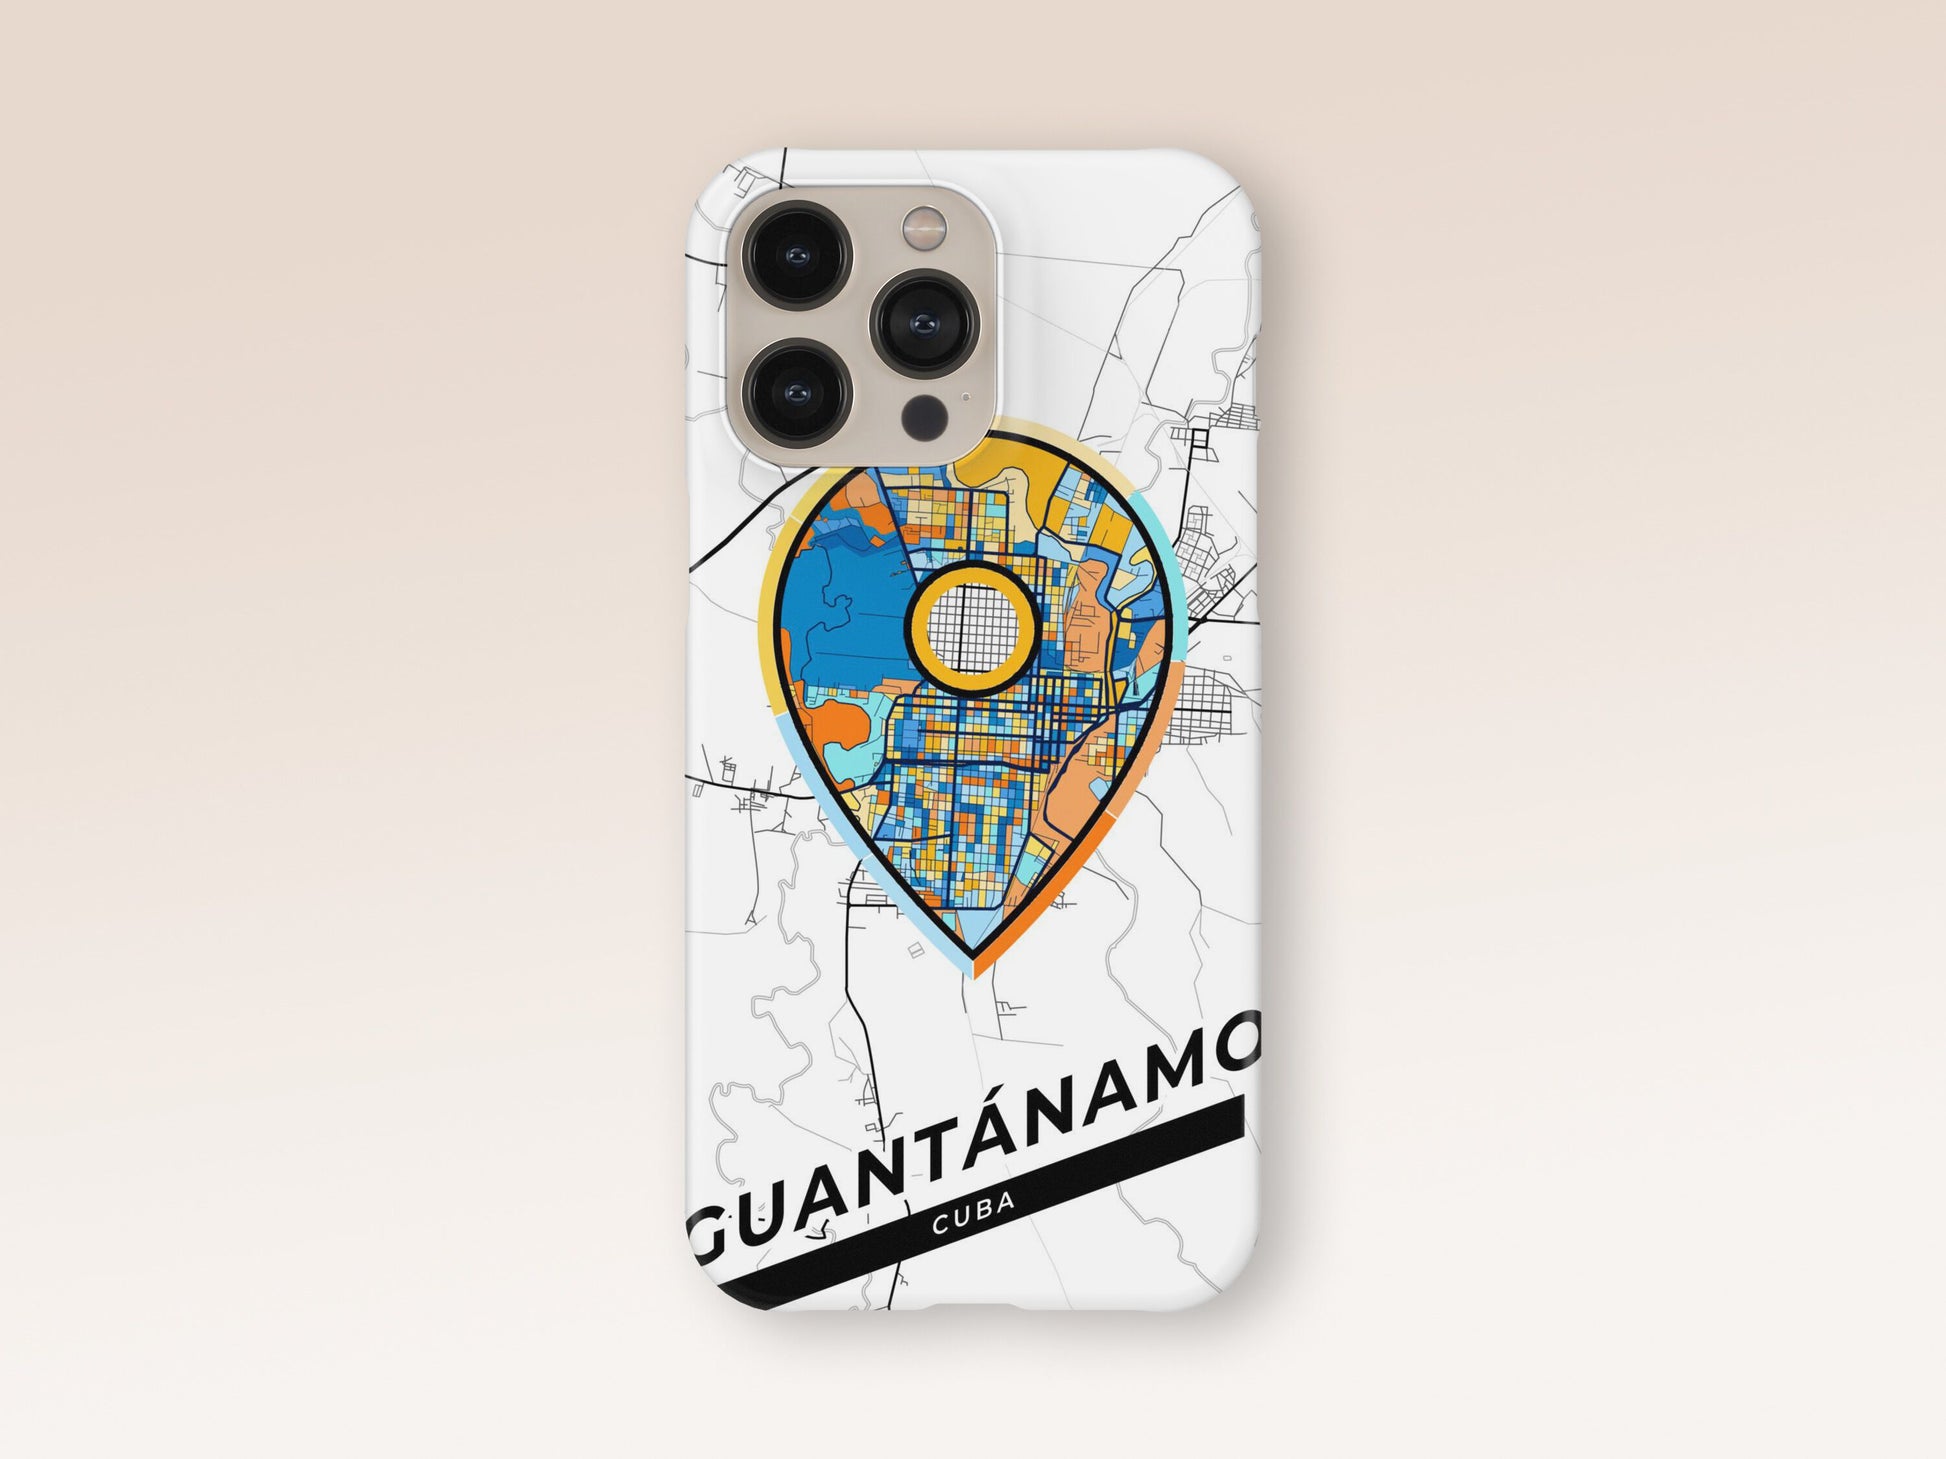 Guantánamo Cuba slim phone case with colorful icon. Birthday, wedding or housewarming gift. Couple match cases. 1